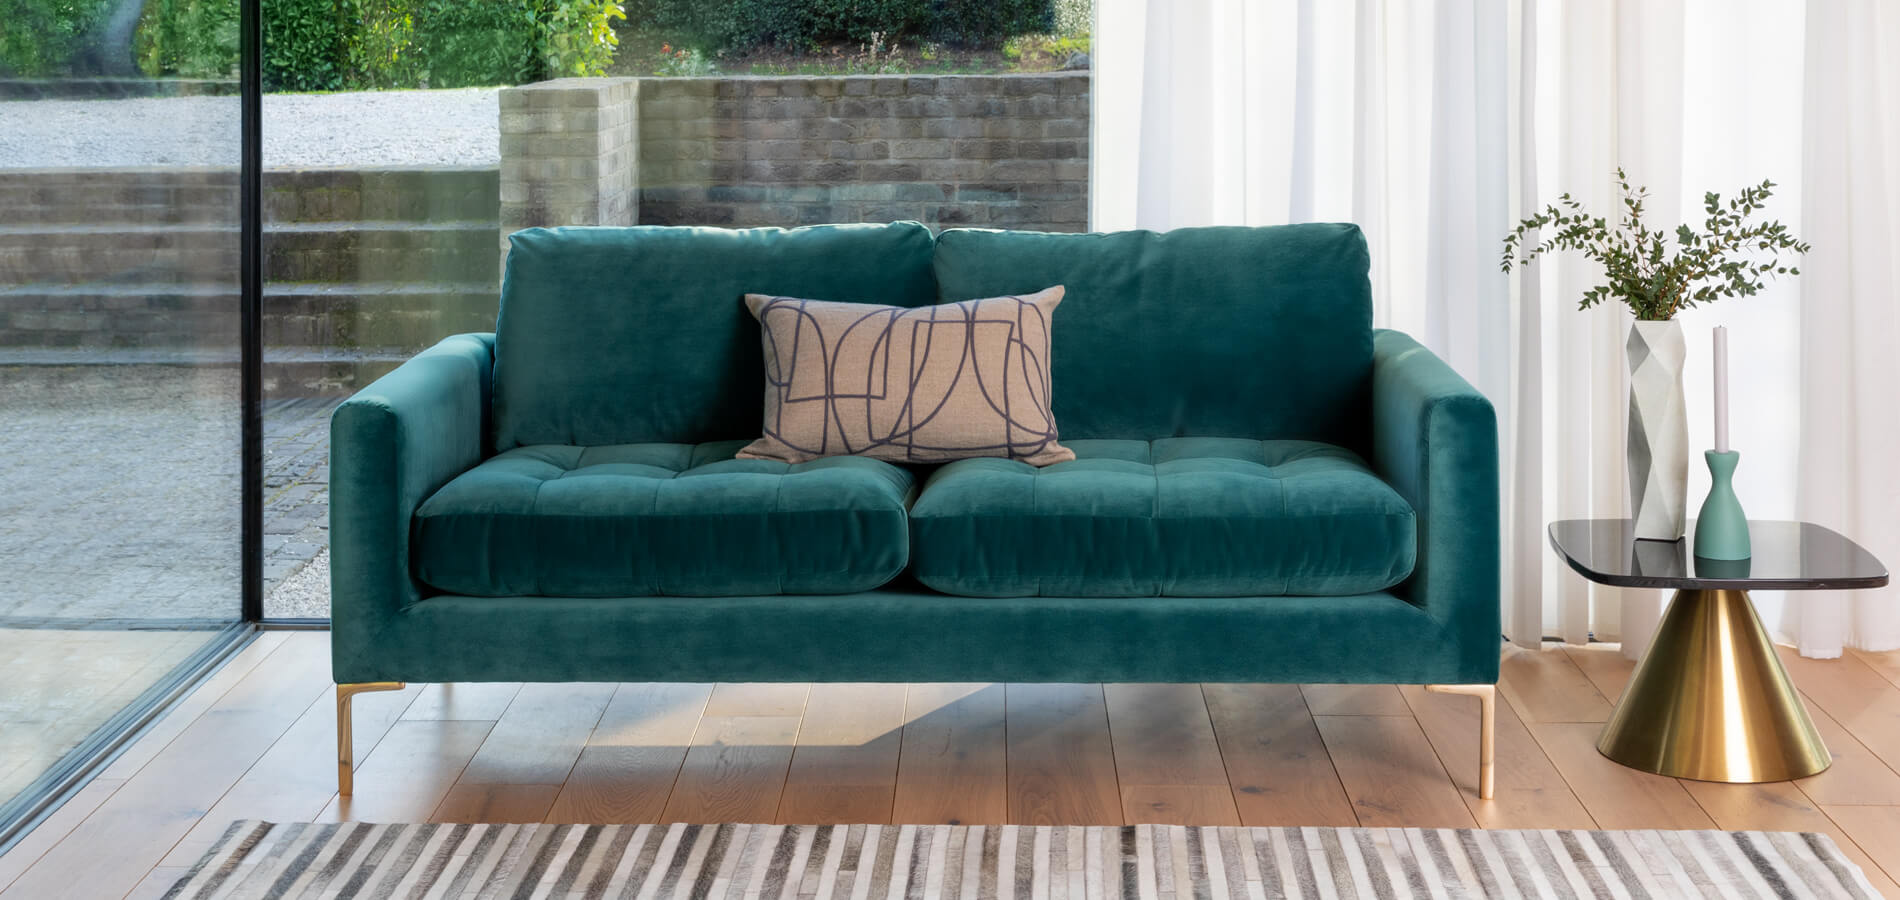 What Throw Pillows Color Is Best For A Teal Couch